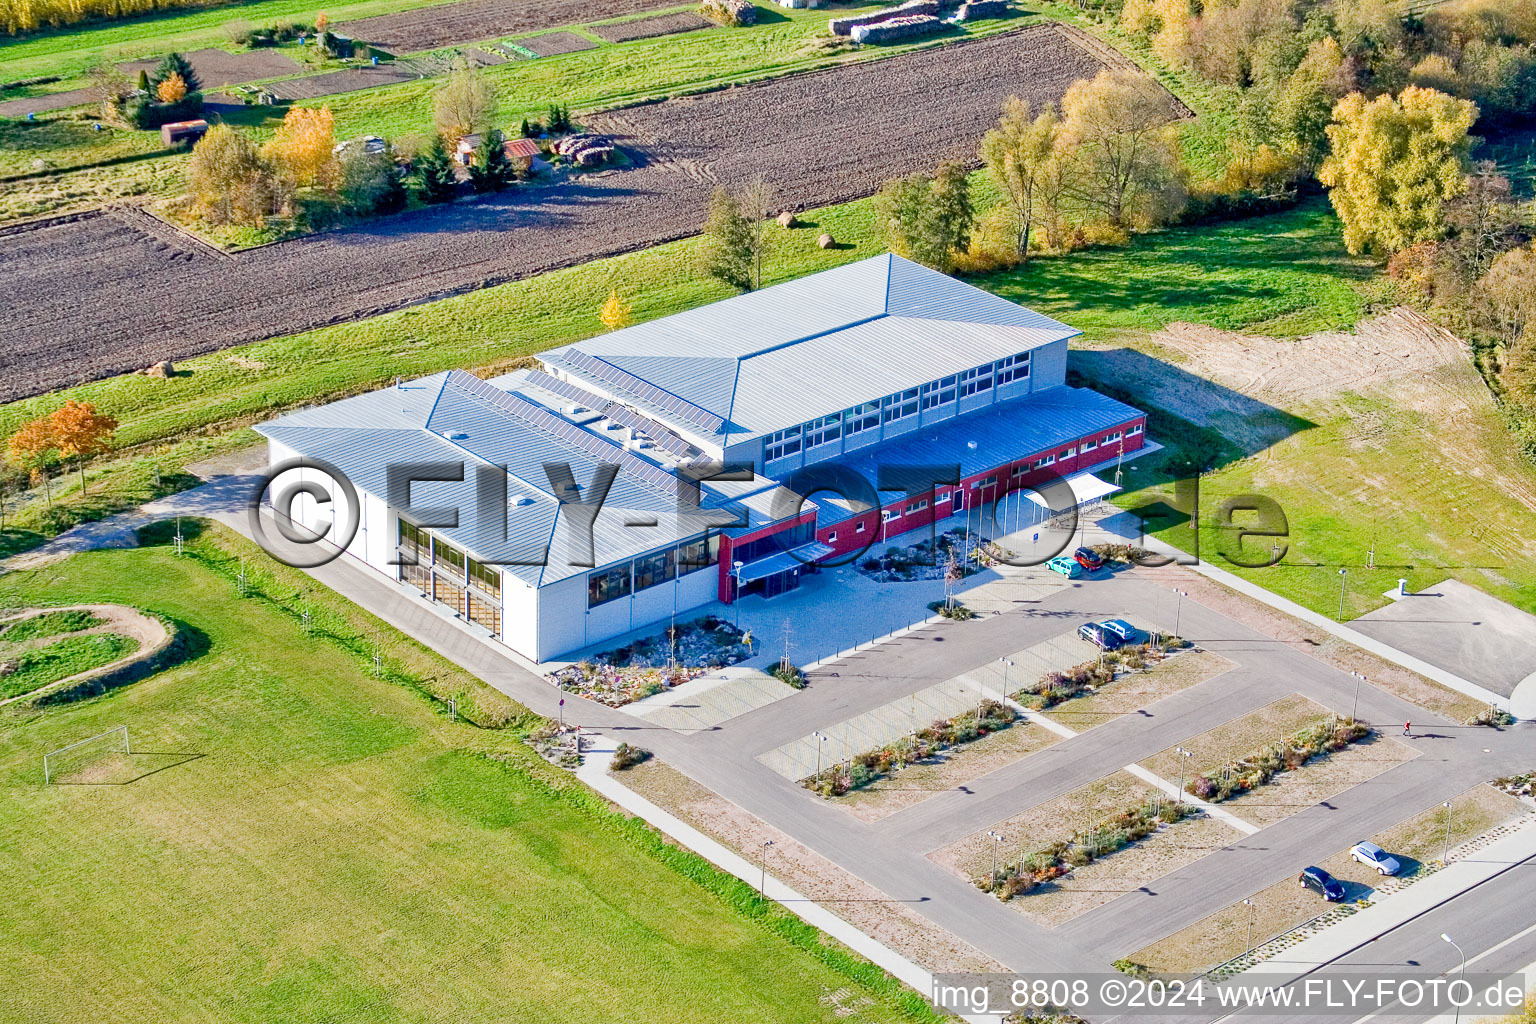 Aerial view of Building of the indoor arena Bienwaldhalle in Kandel in the state Rhineland-Palatinate